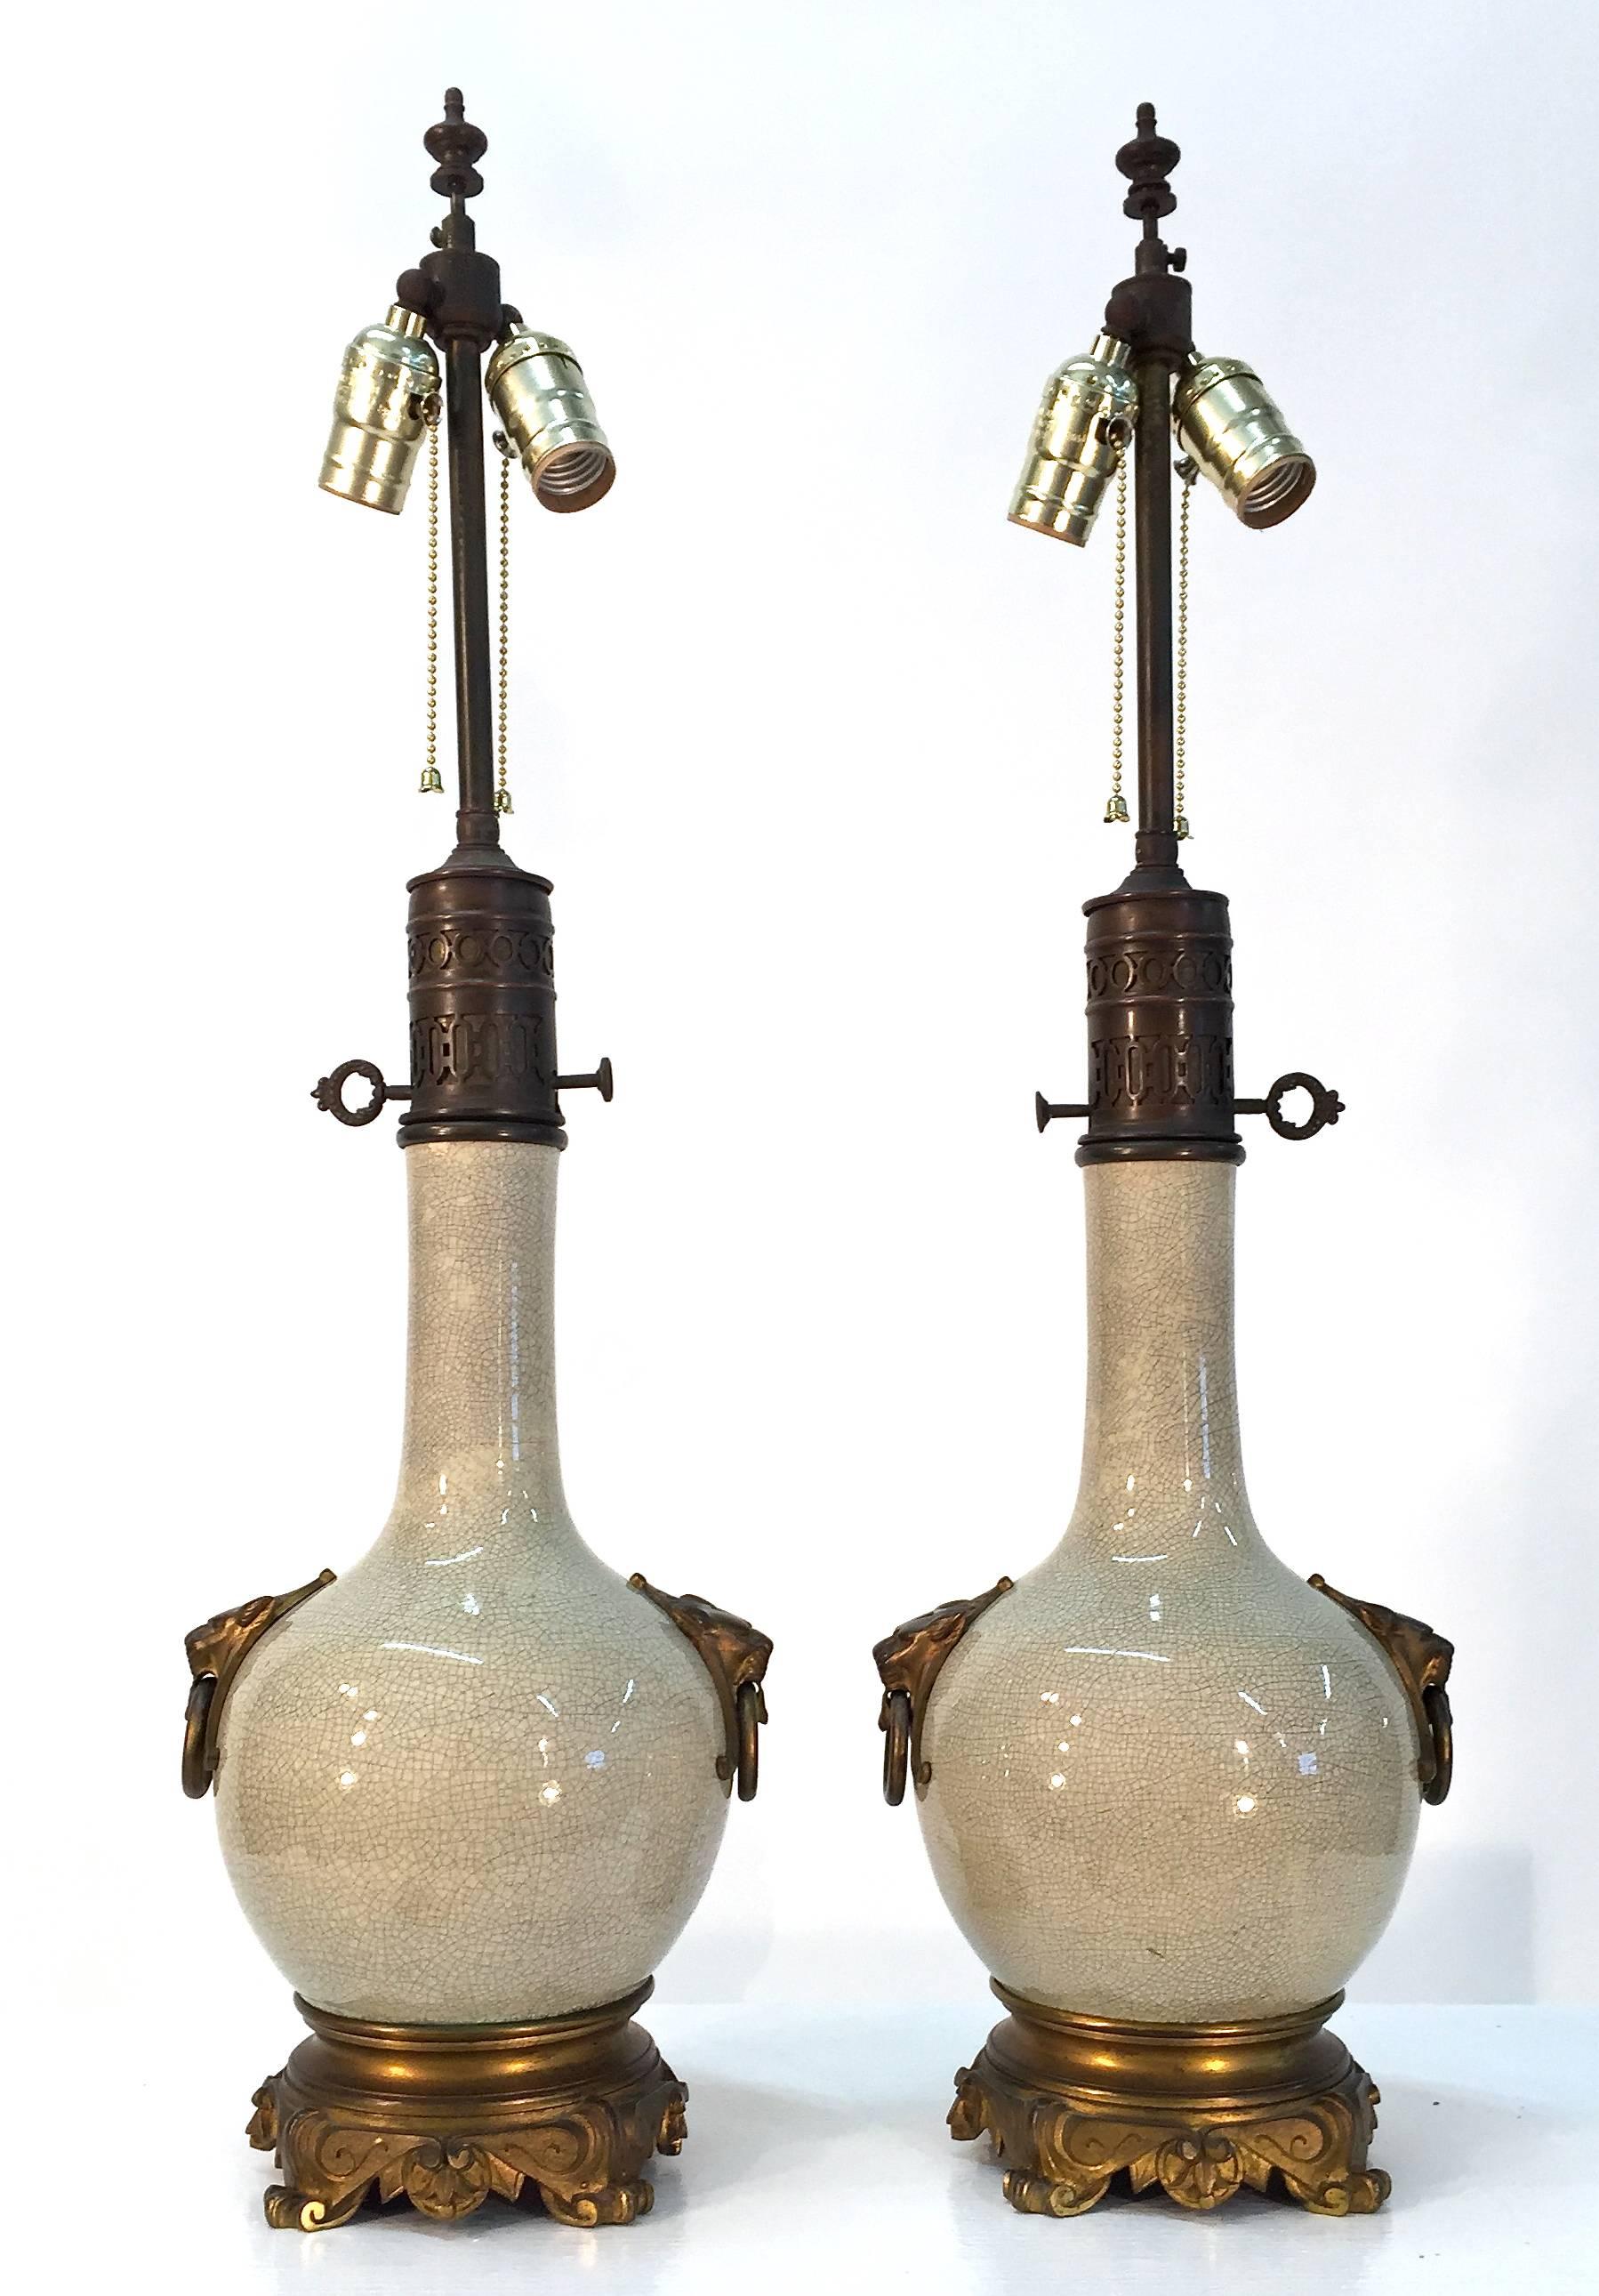 19th Century, French, Bronze-Mounted Crackle Glaze Ceramic Lamps In Good Condition For Sale In Lake Success, NY